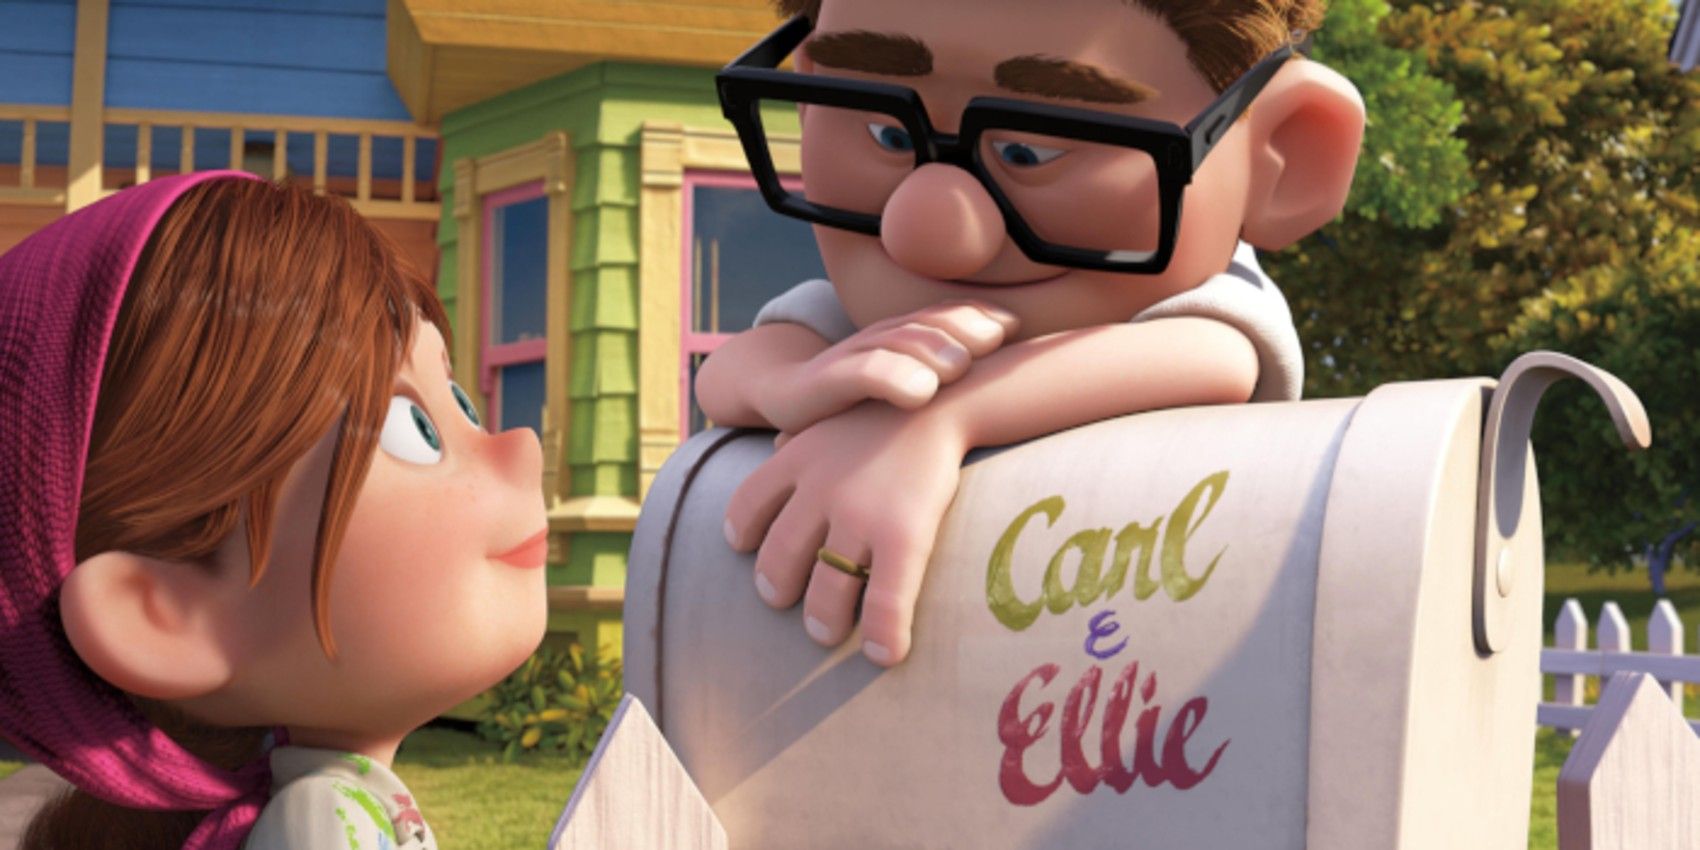 Carl and Ellie paint a mailbox in Pixar Up